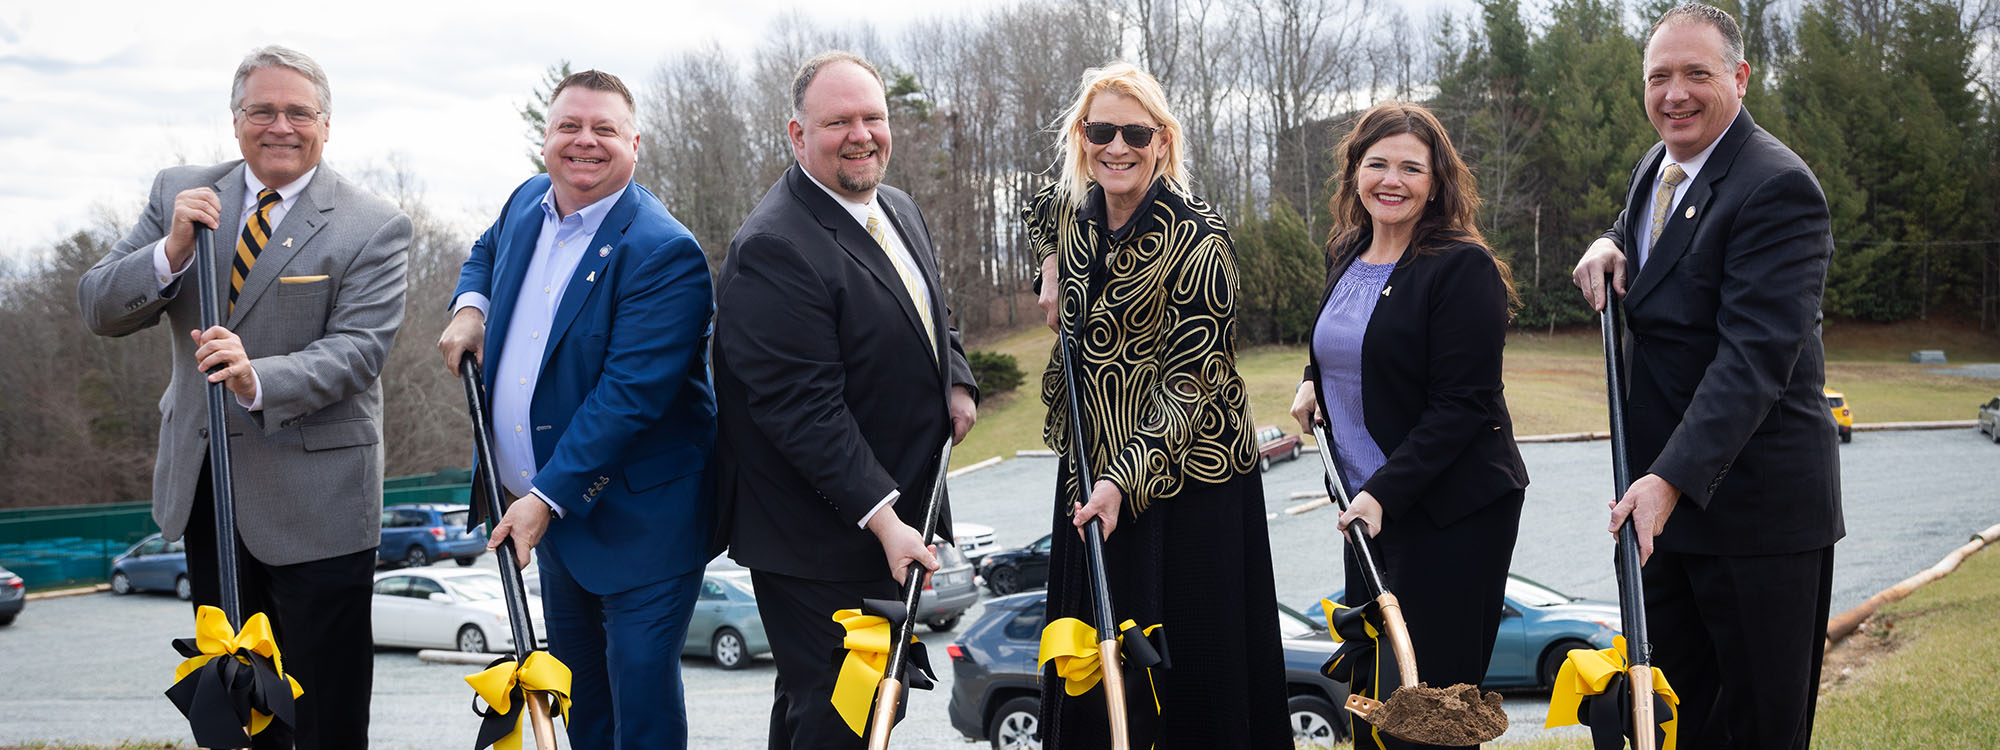 App State breaks ground on 1st phase of Innovation District